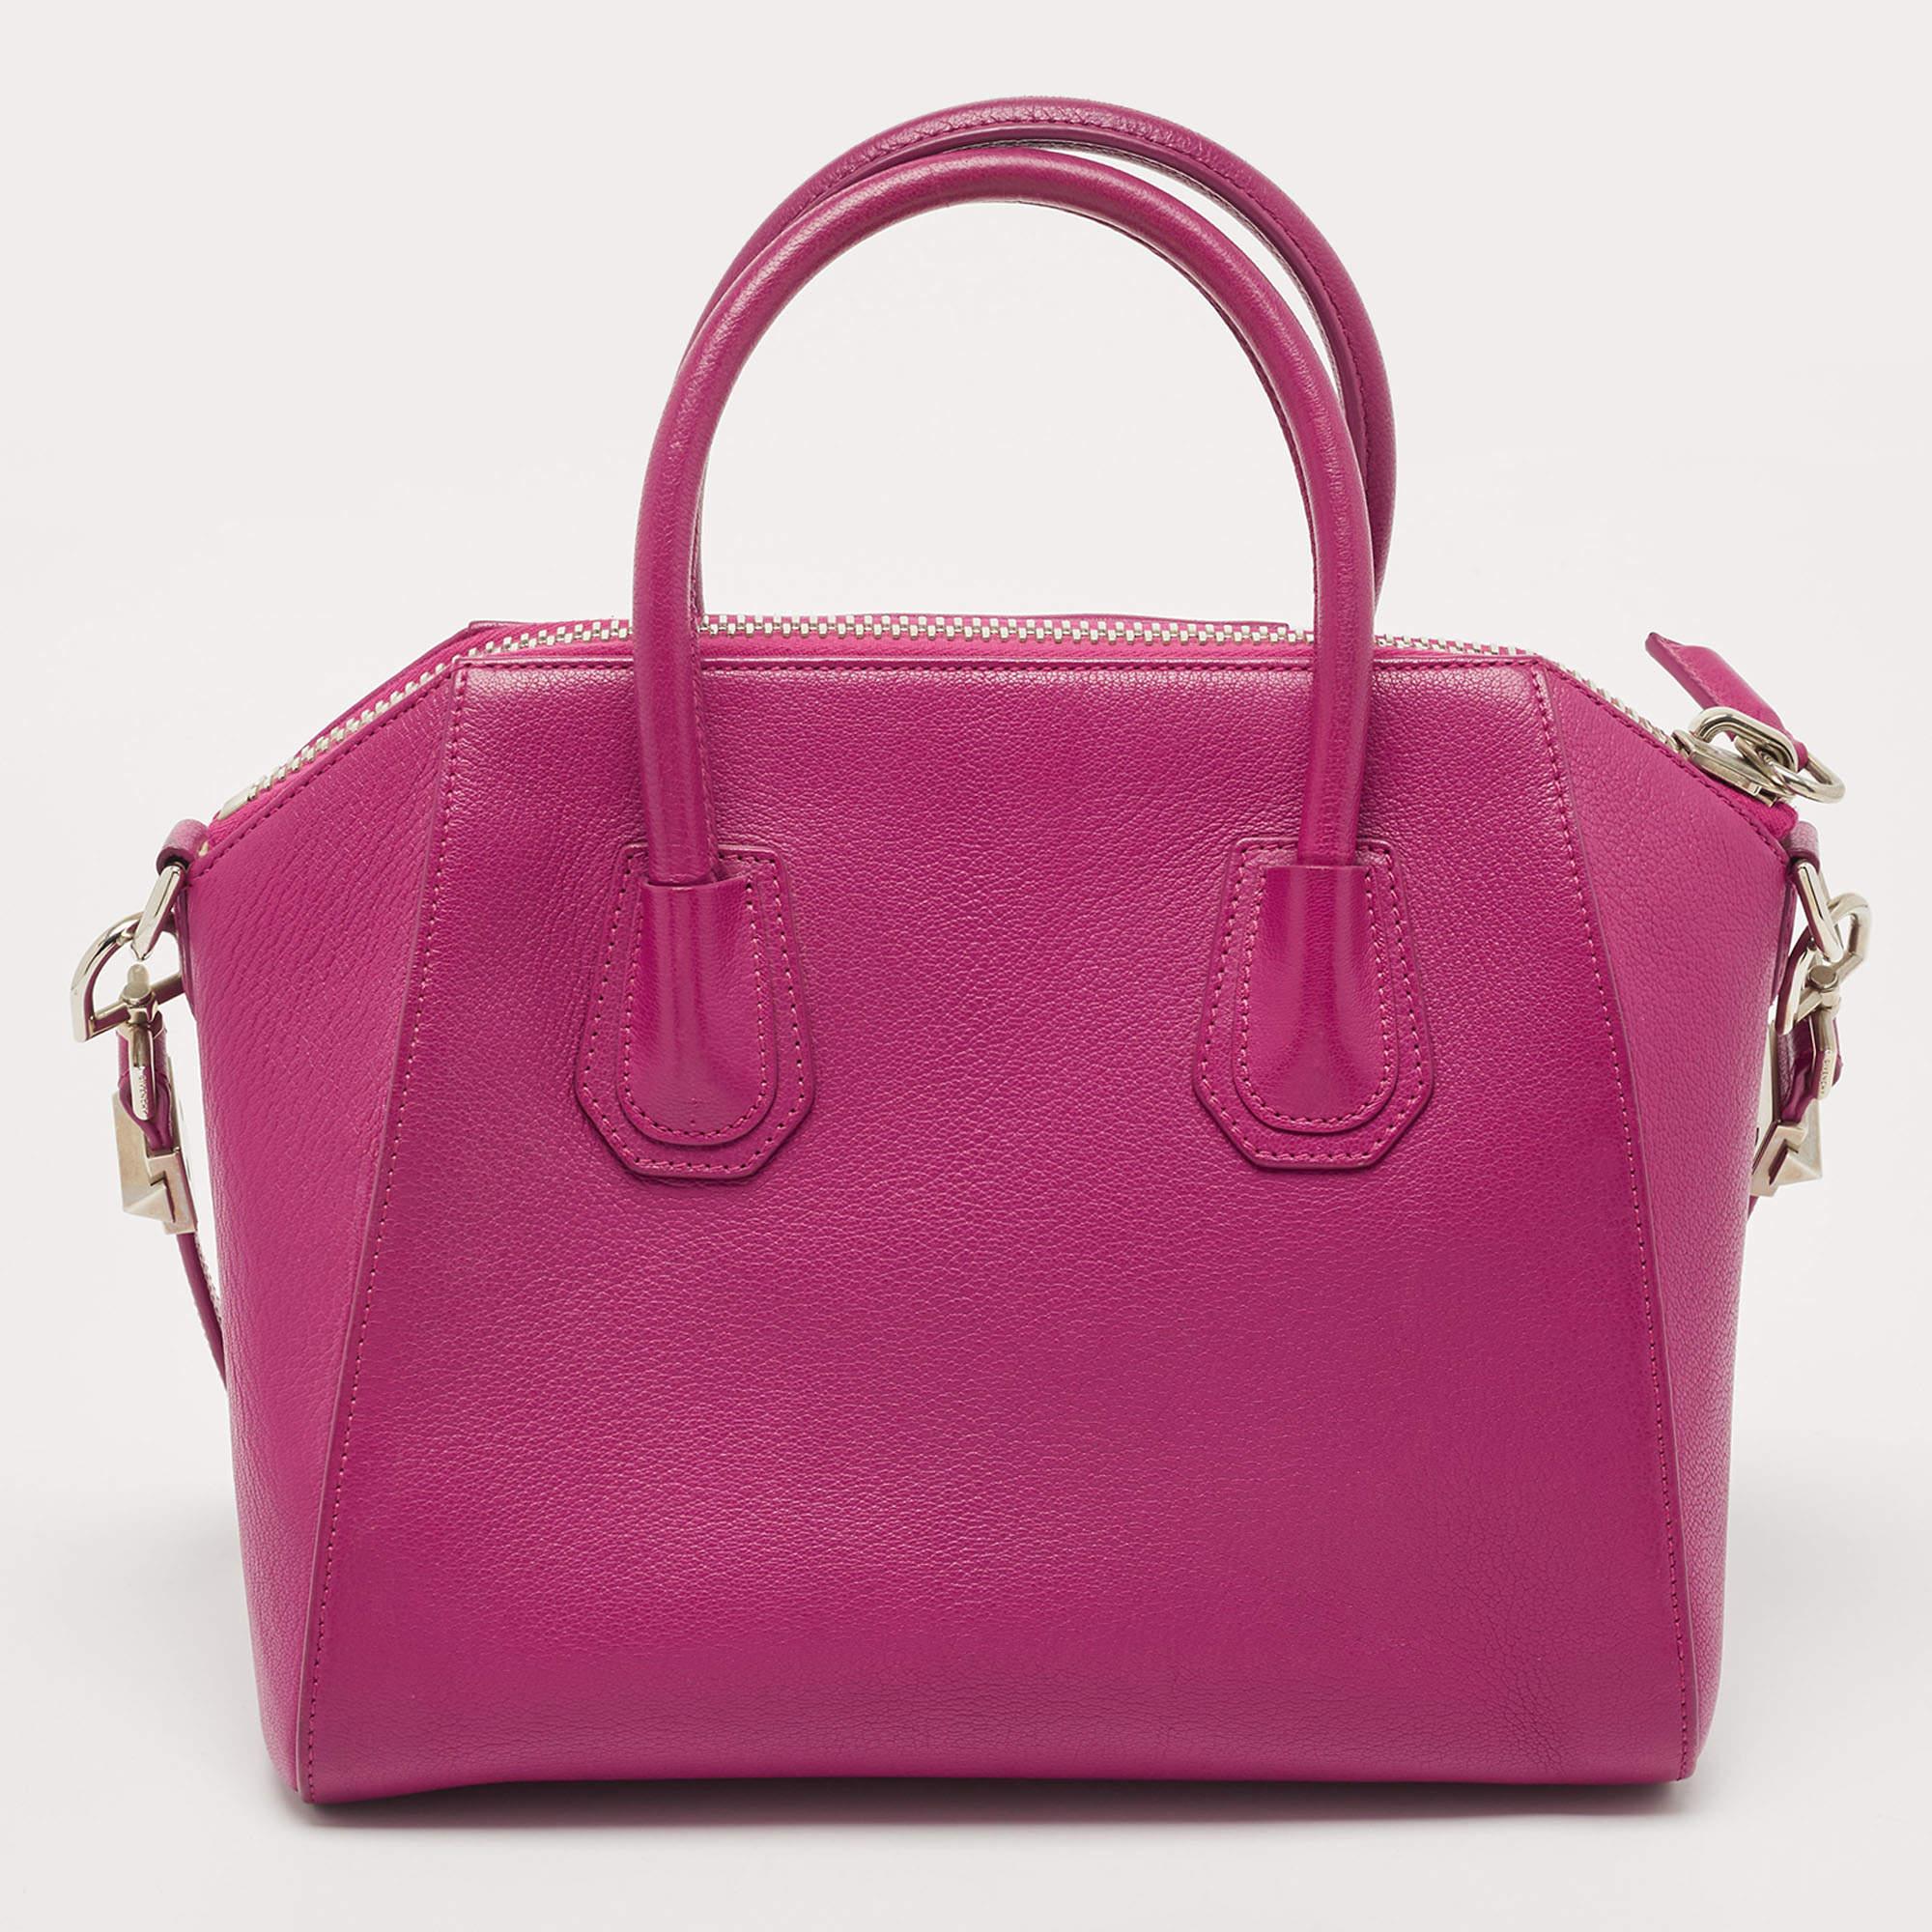 Defined and sturdy, this Givenchy Antigona satchel is one statement bag that will surely hold its value. Crafted from magenta leather, it features an elegant geometric cut, double rolled top handles, a removable shoulder strap, and silver-tone